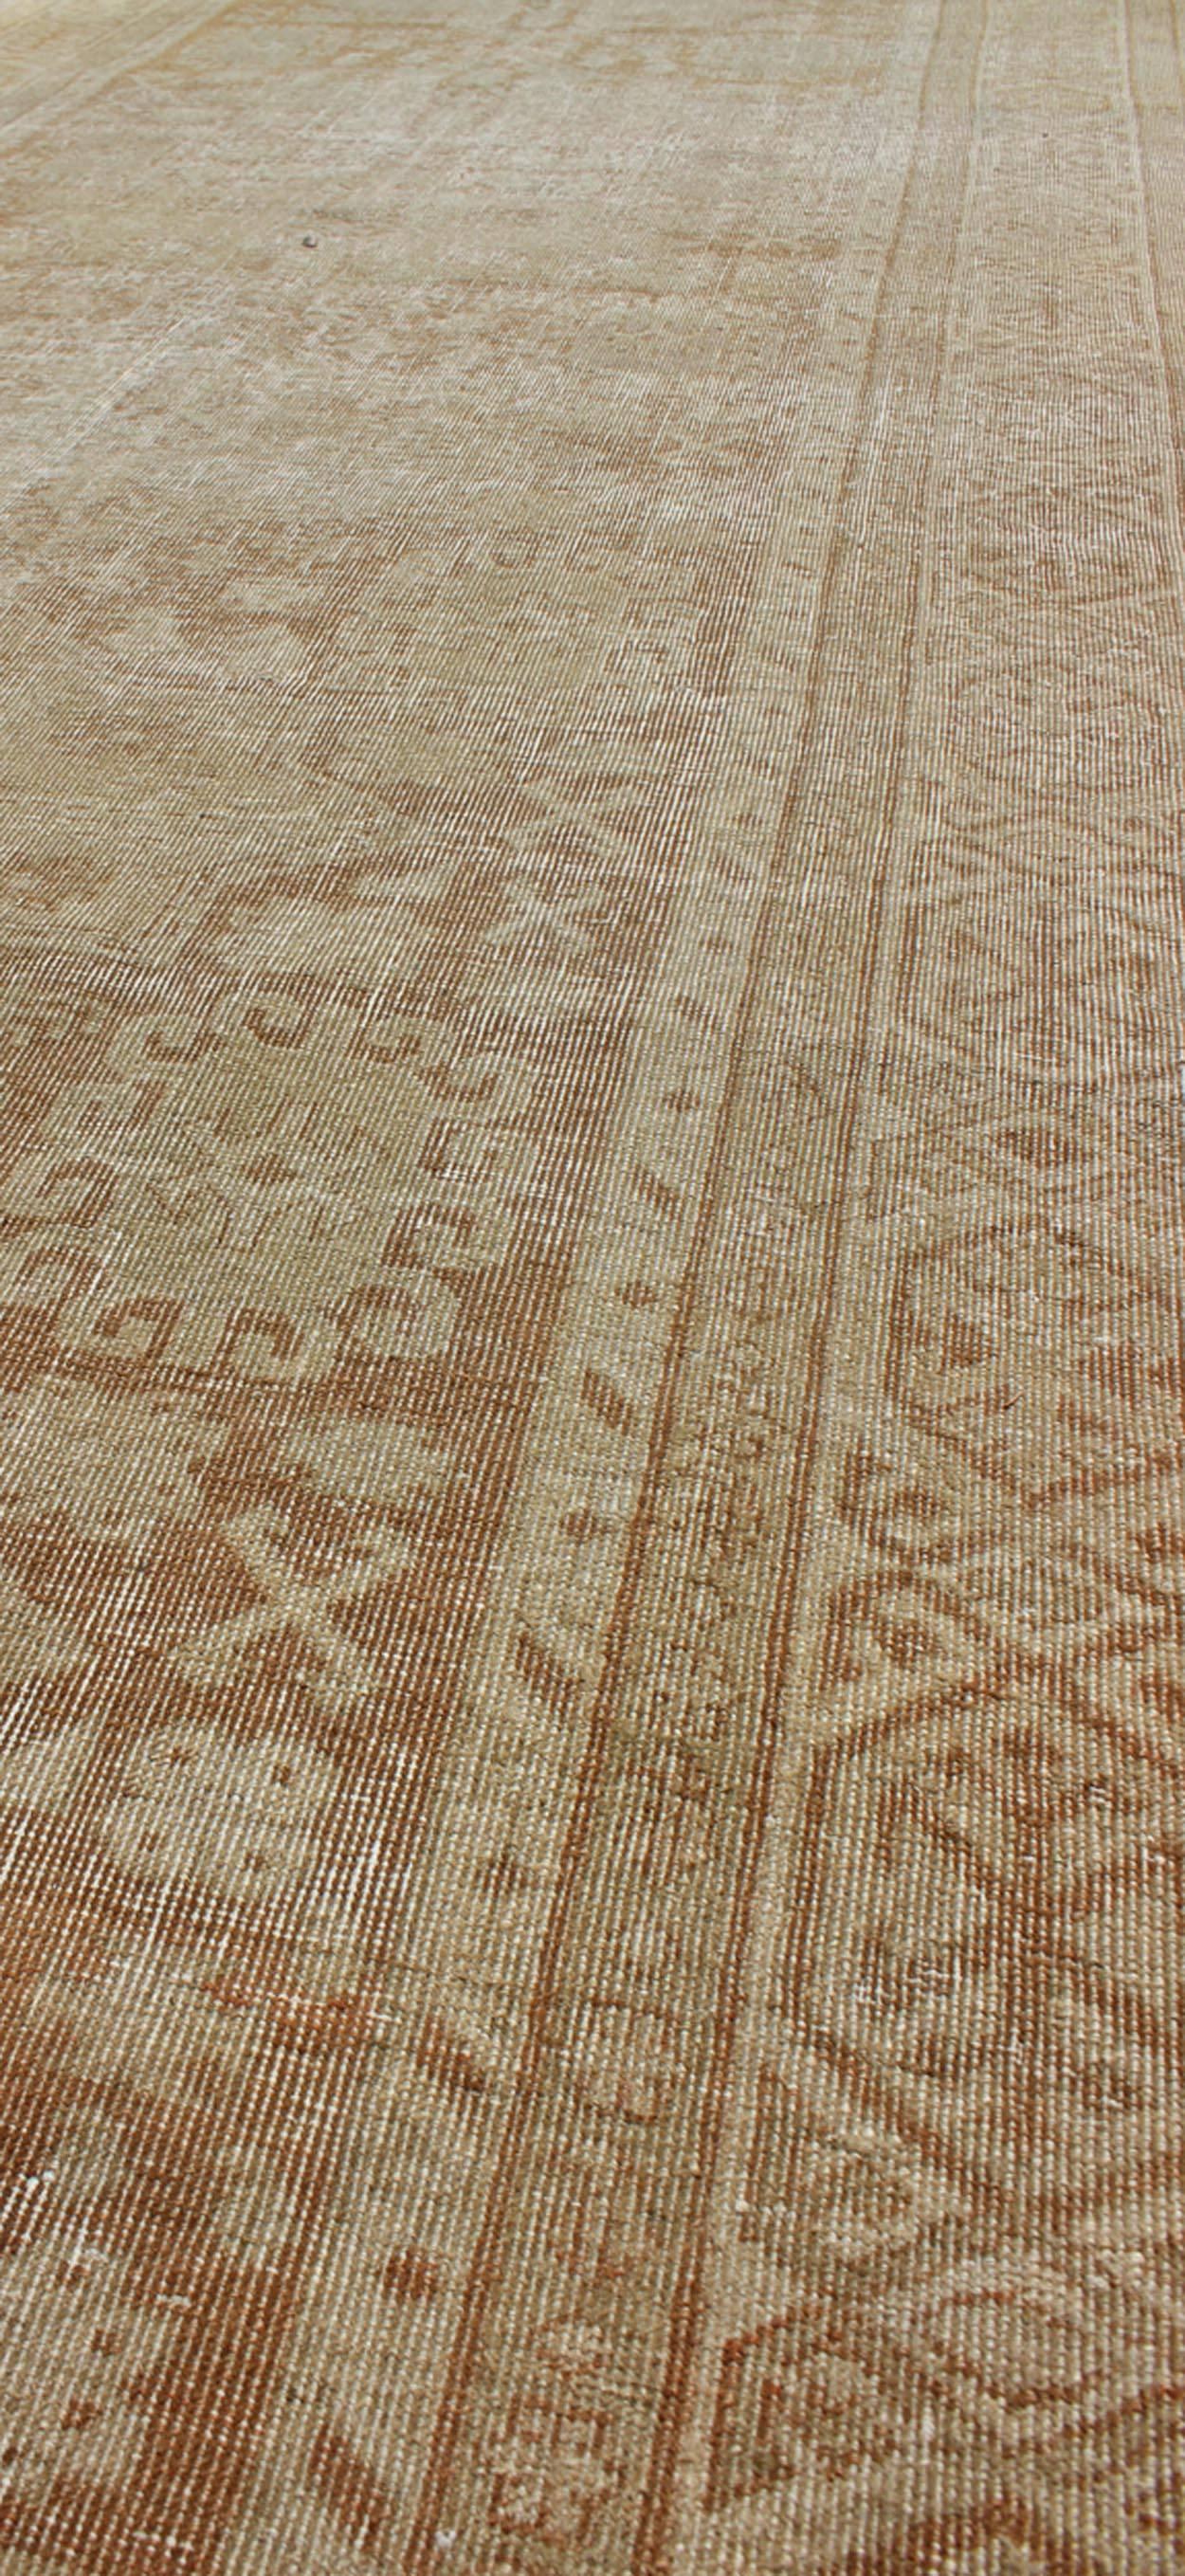 Hand-Knotted Long Distressed Antique Amritsar Runner in Nude, Taupe, Camel and Neutrals